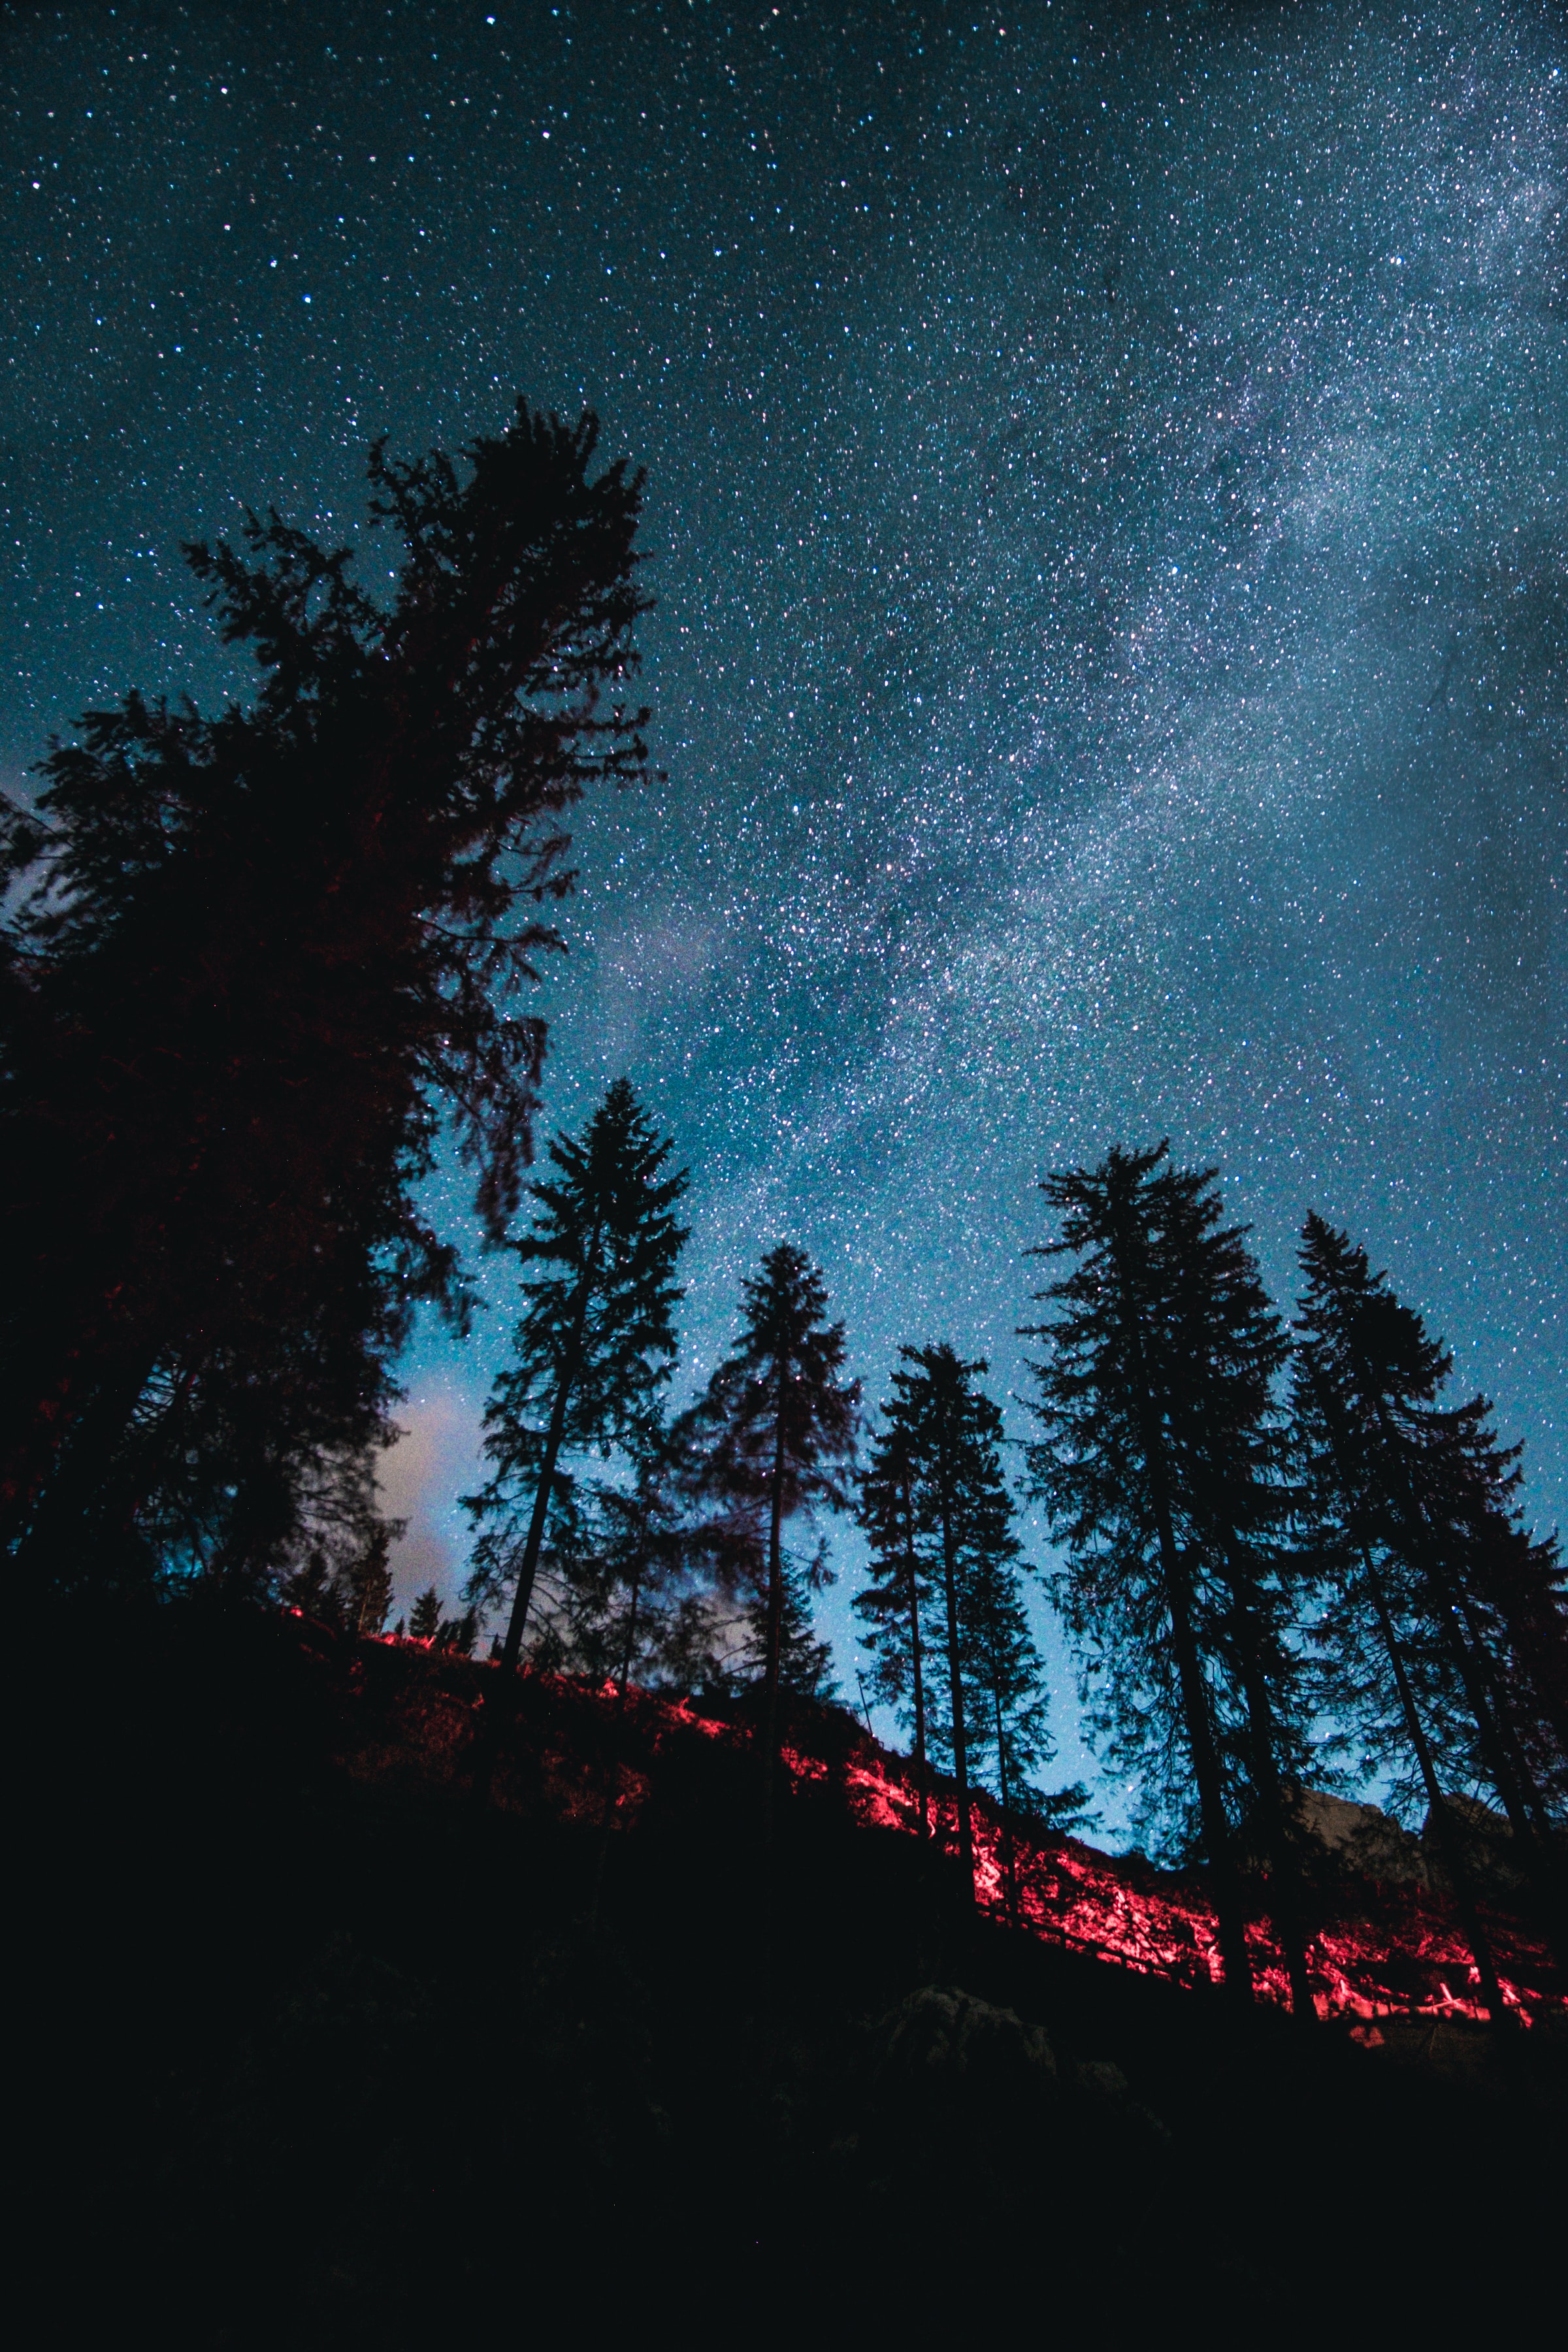 stars, nature, trees, forest, starry sky, spruce, fir